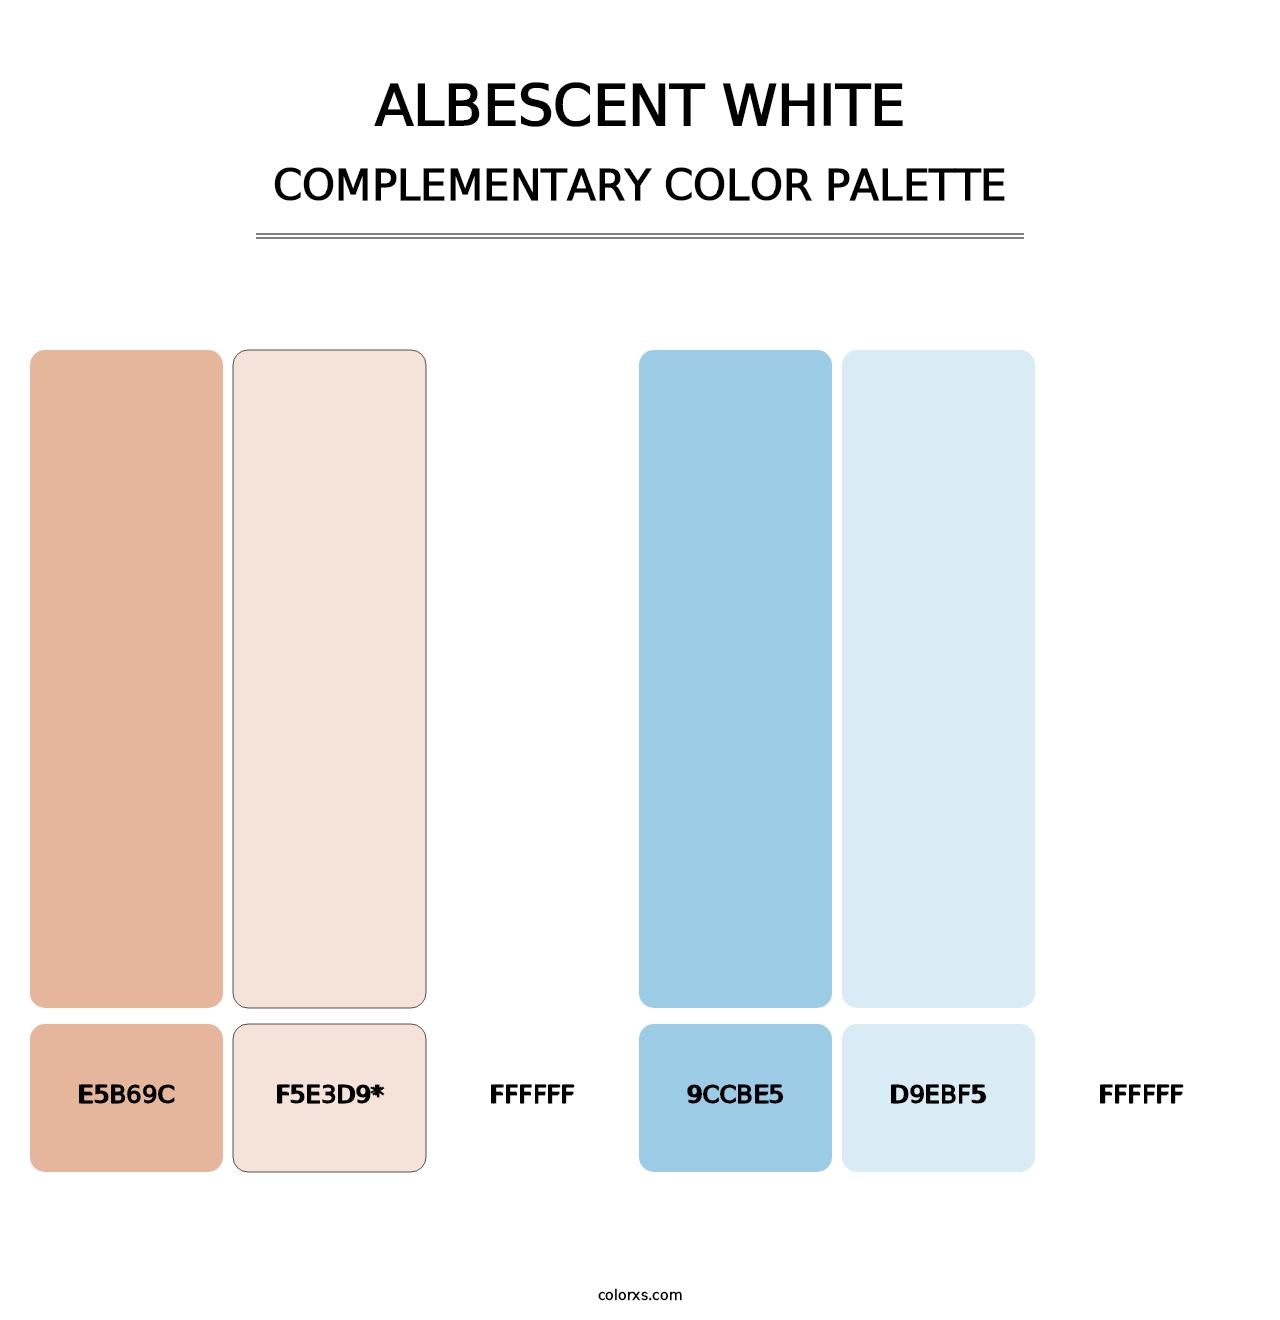 Albescent White - Complementary Color Palette